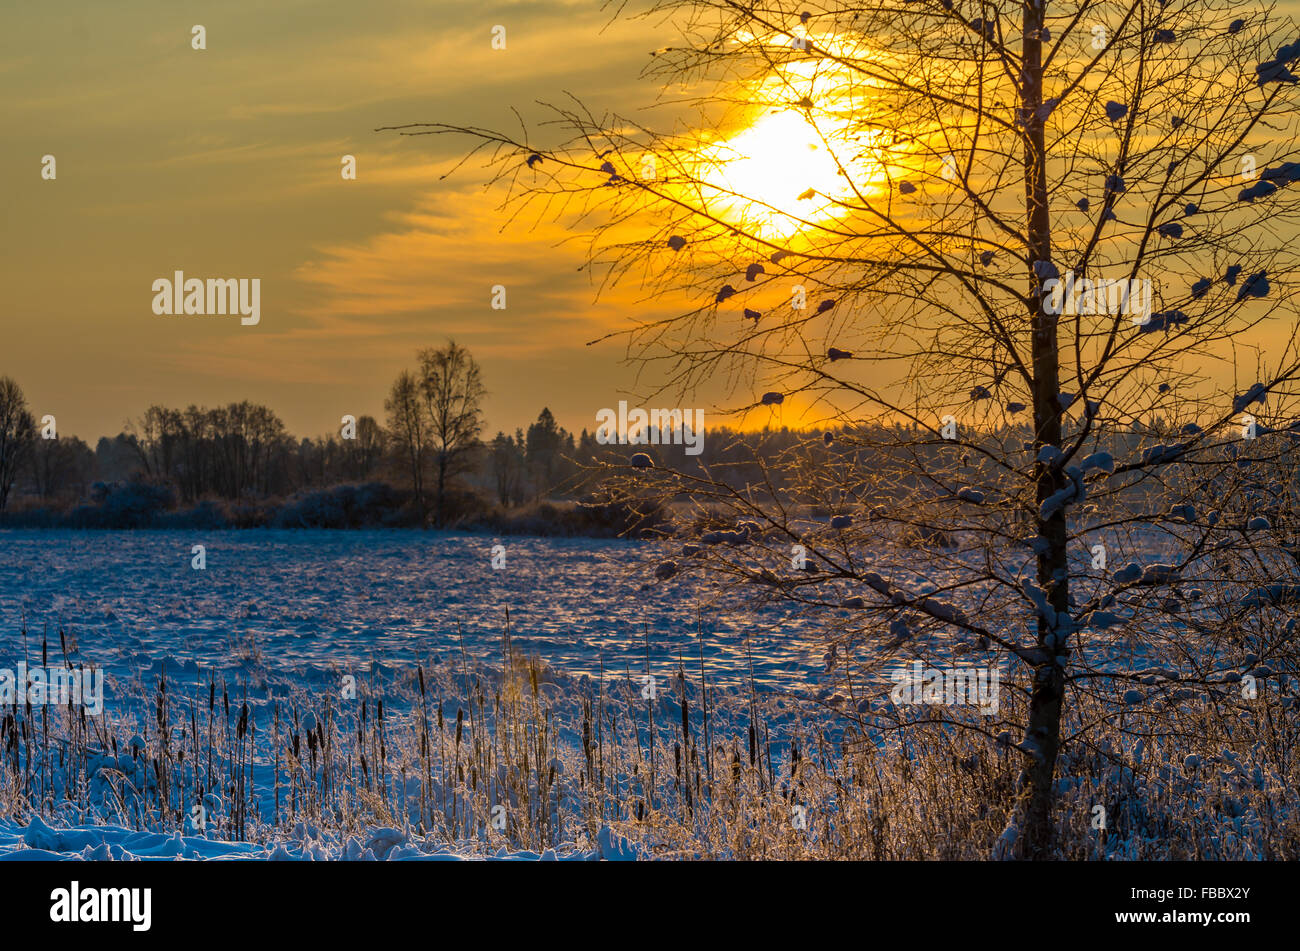 beatiful sunrise through birch branches at winter with cattails in front Stock Photo